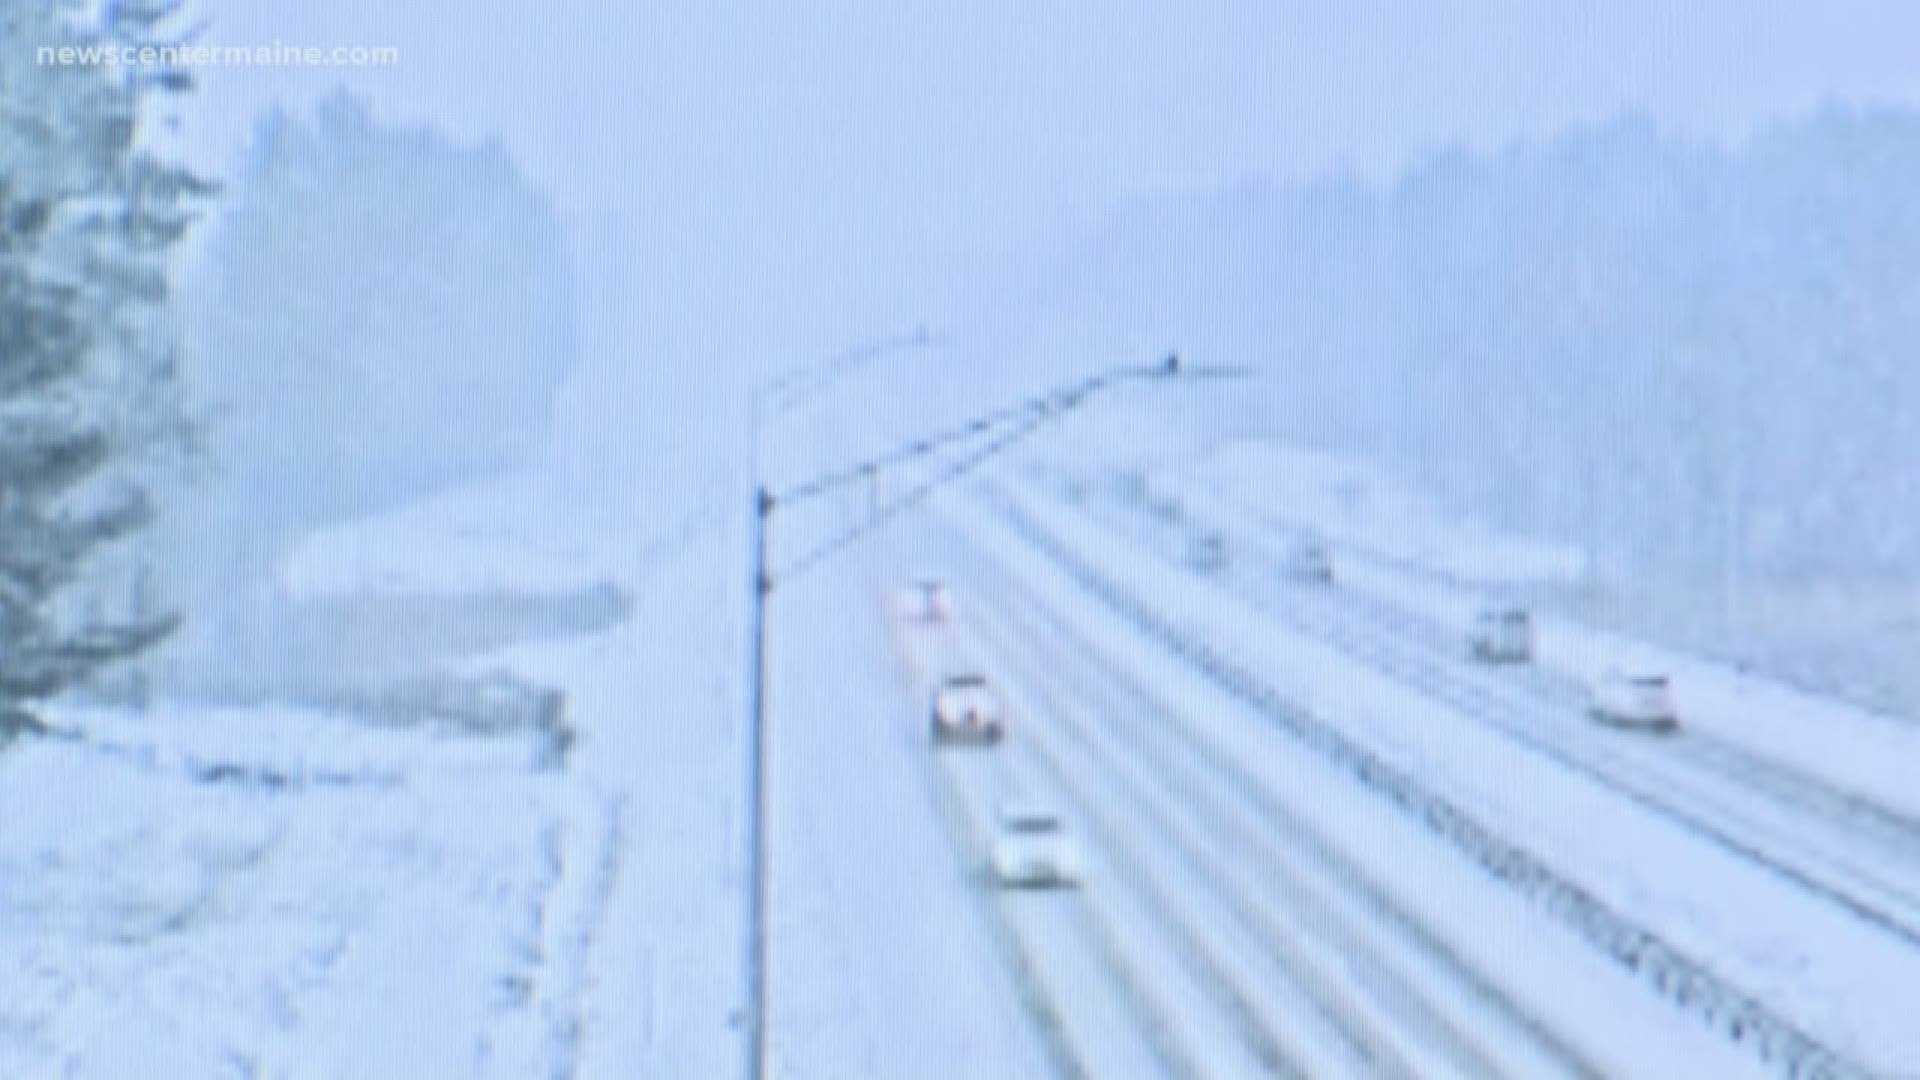 Shannon Moss looks into how the Maine Turnpike Authority center handles snowstorms.